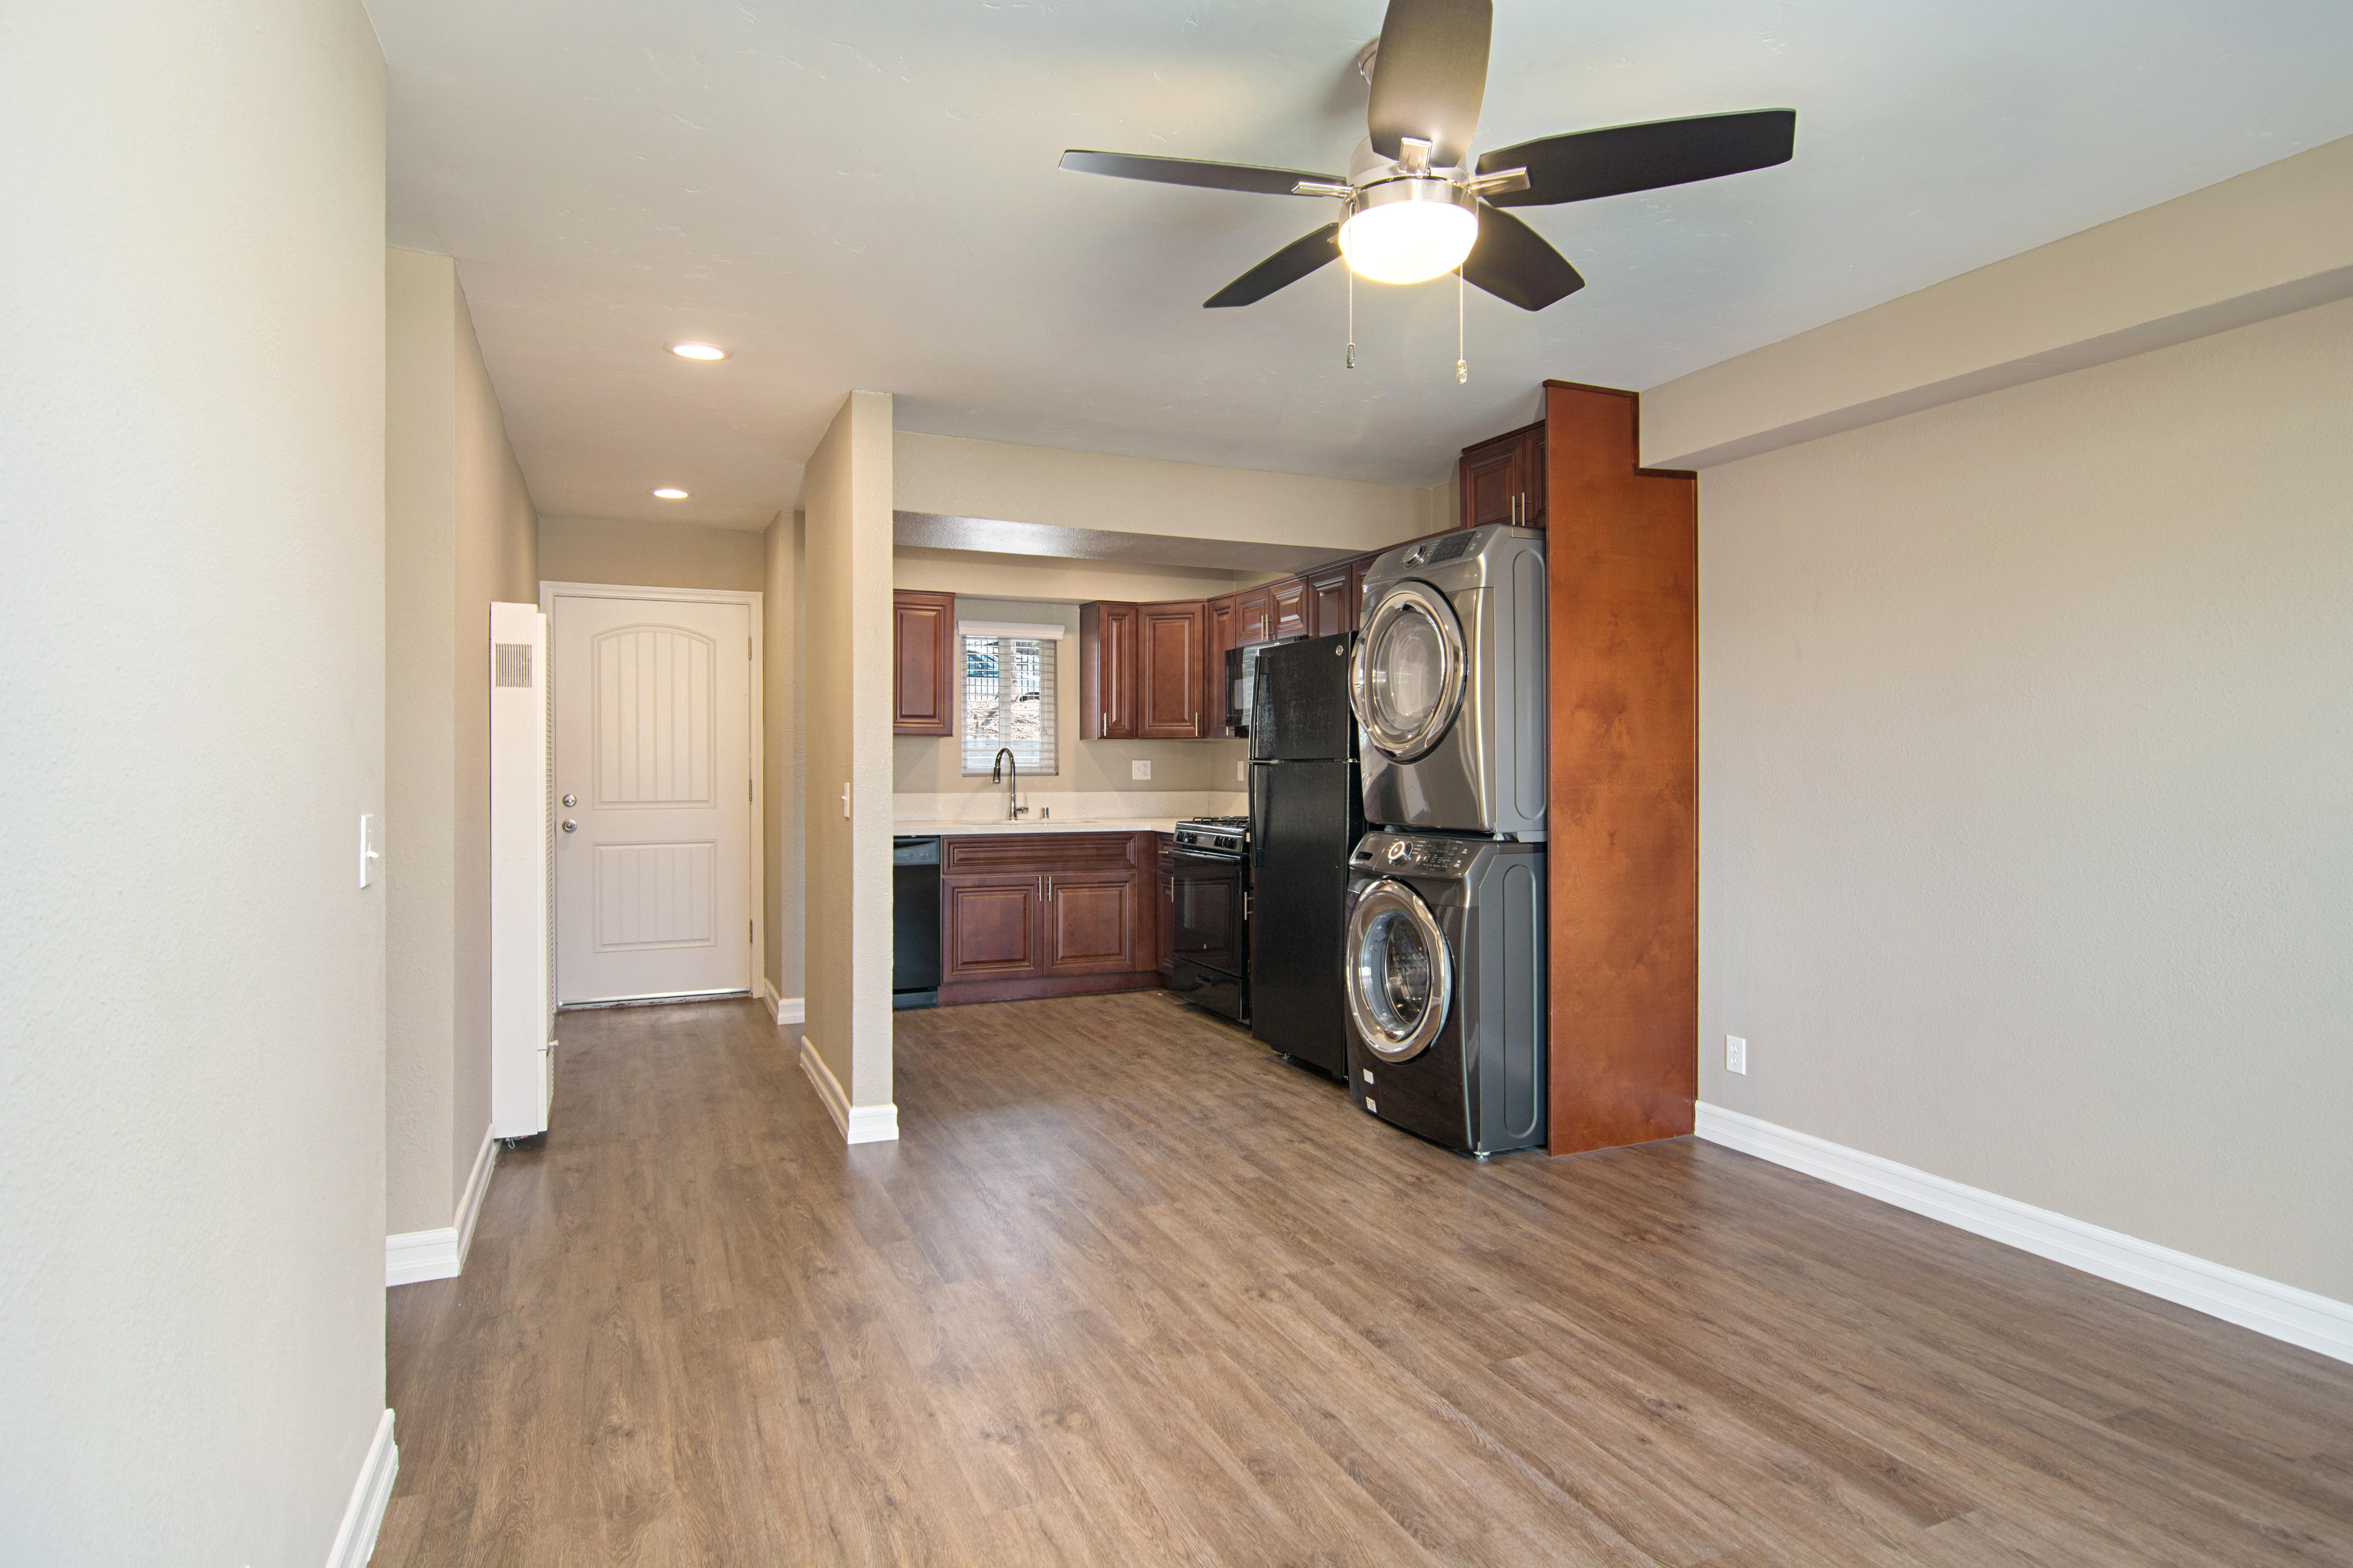 Living room and kitchen with wood-style floors, ceiling fan, and stackable washer-dryer